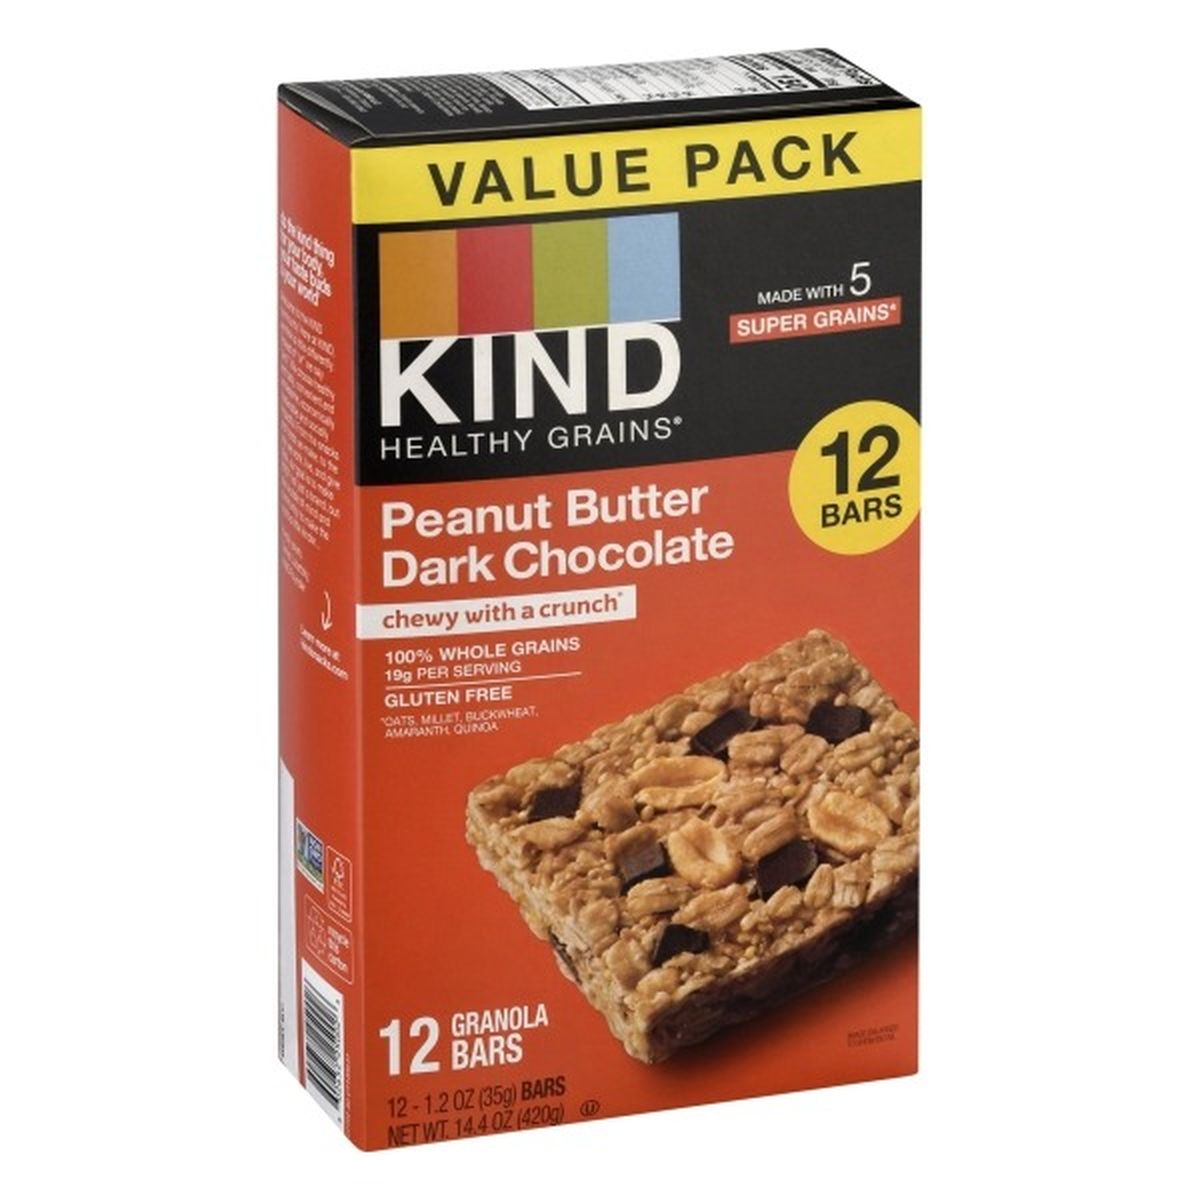 Calories in KIND Healthy Grains Granola Bars, Peanut Butter Dark Chocolate, Value Pack